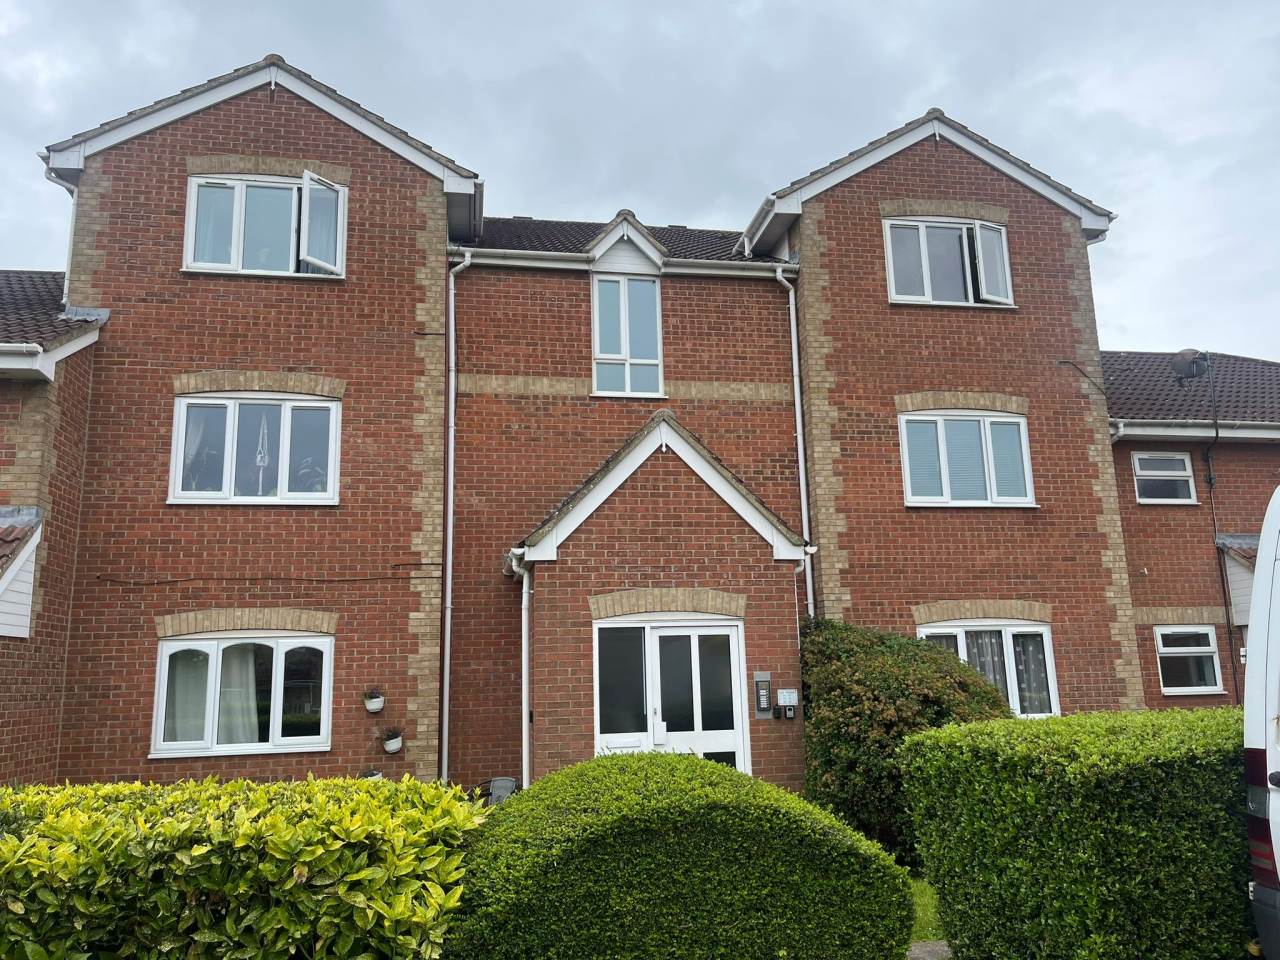 2 bed Flat for rent in Almondsbury. From Property Wise